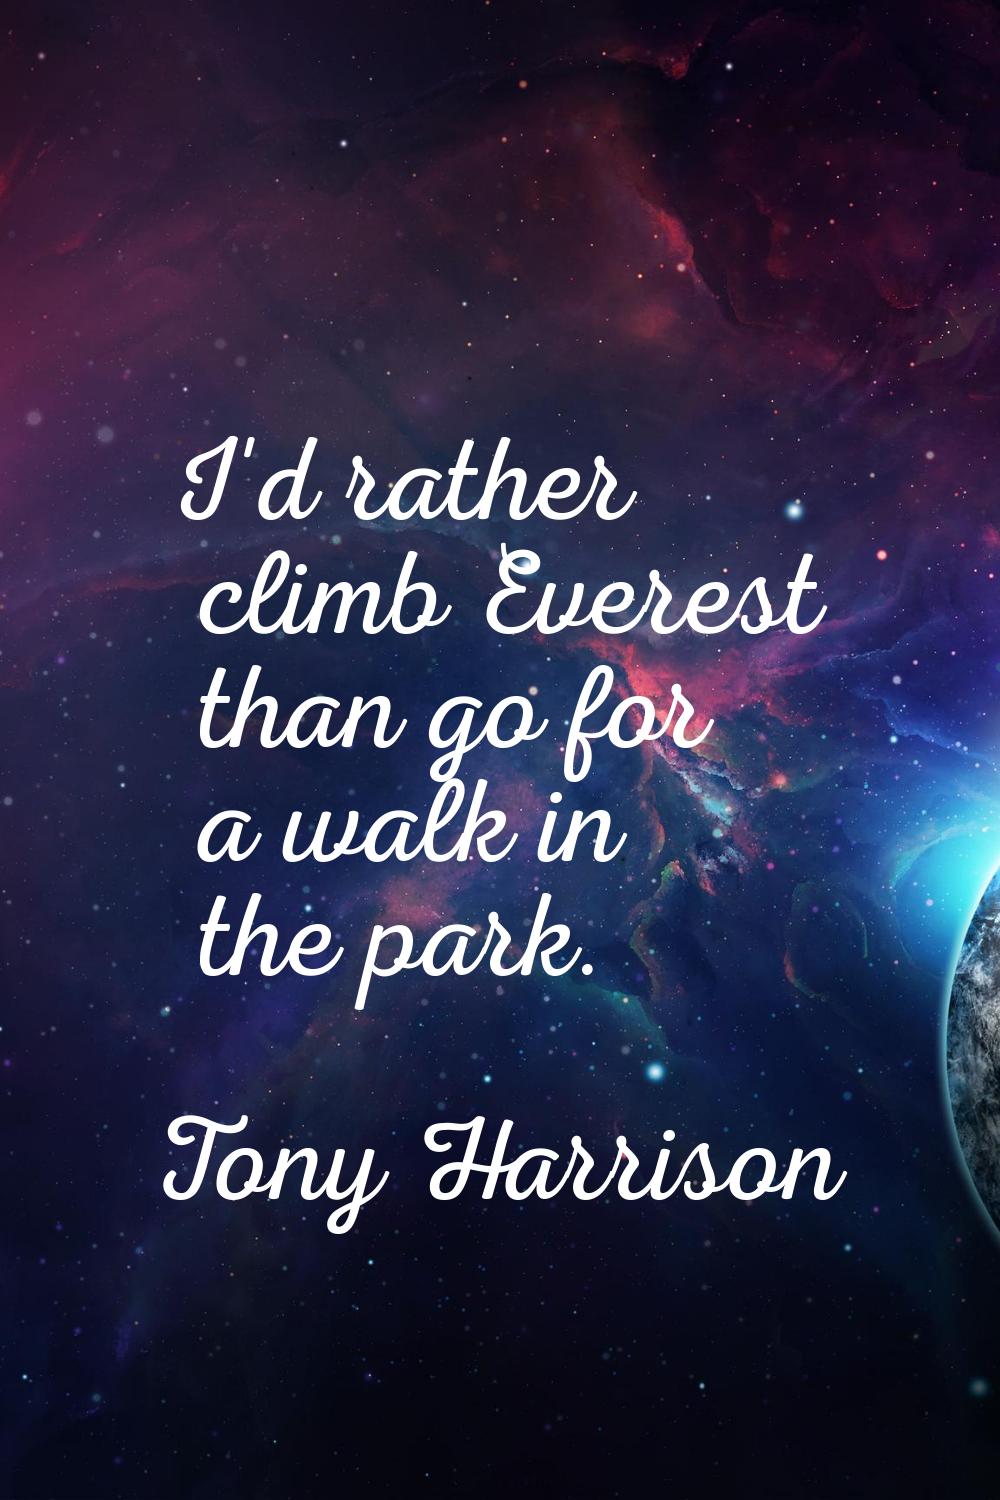 I'd rather climb Everest than go for a walk in the park.